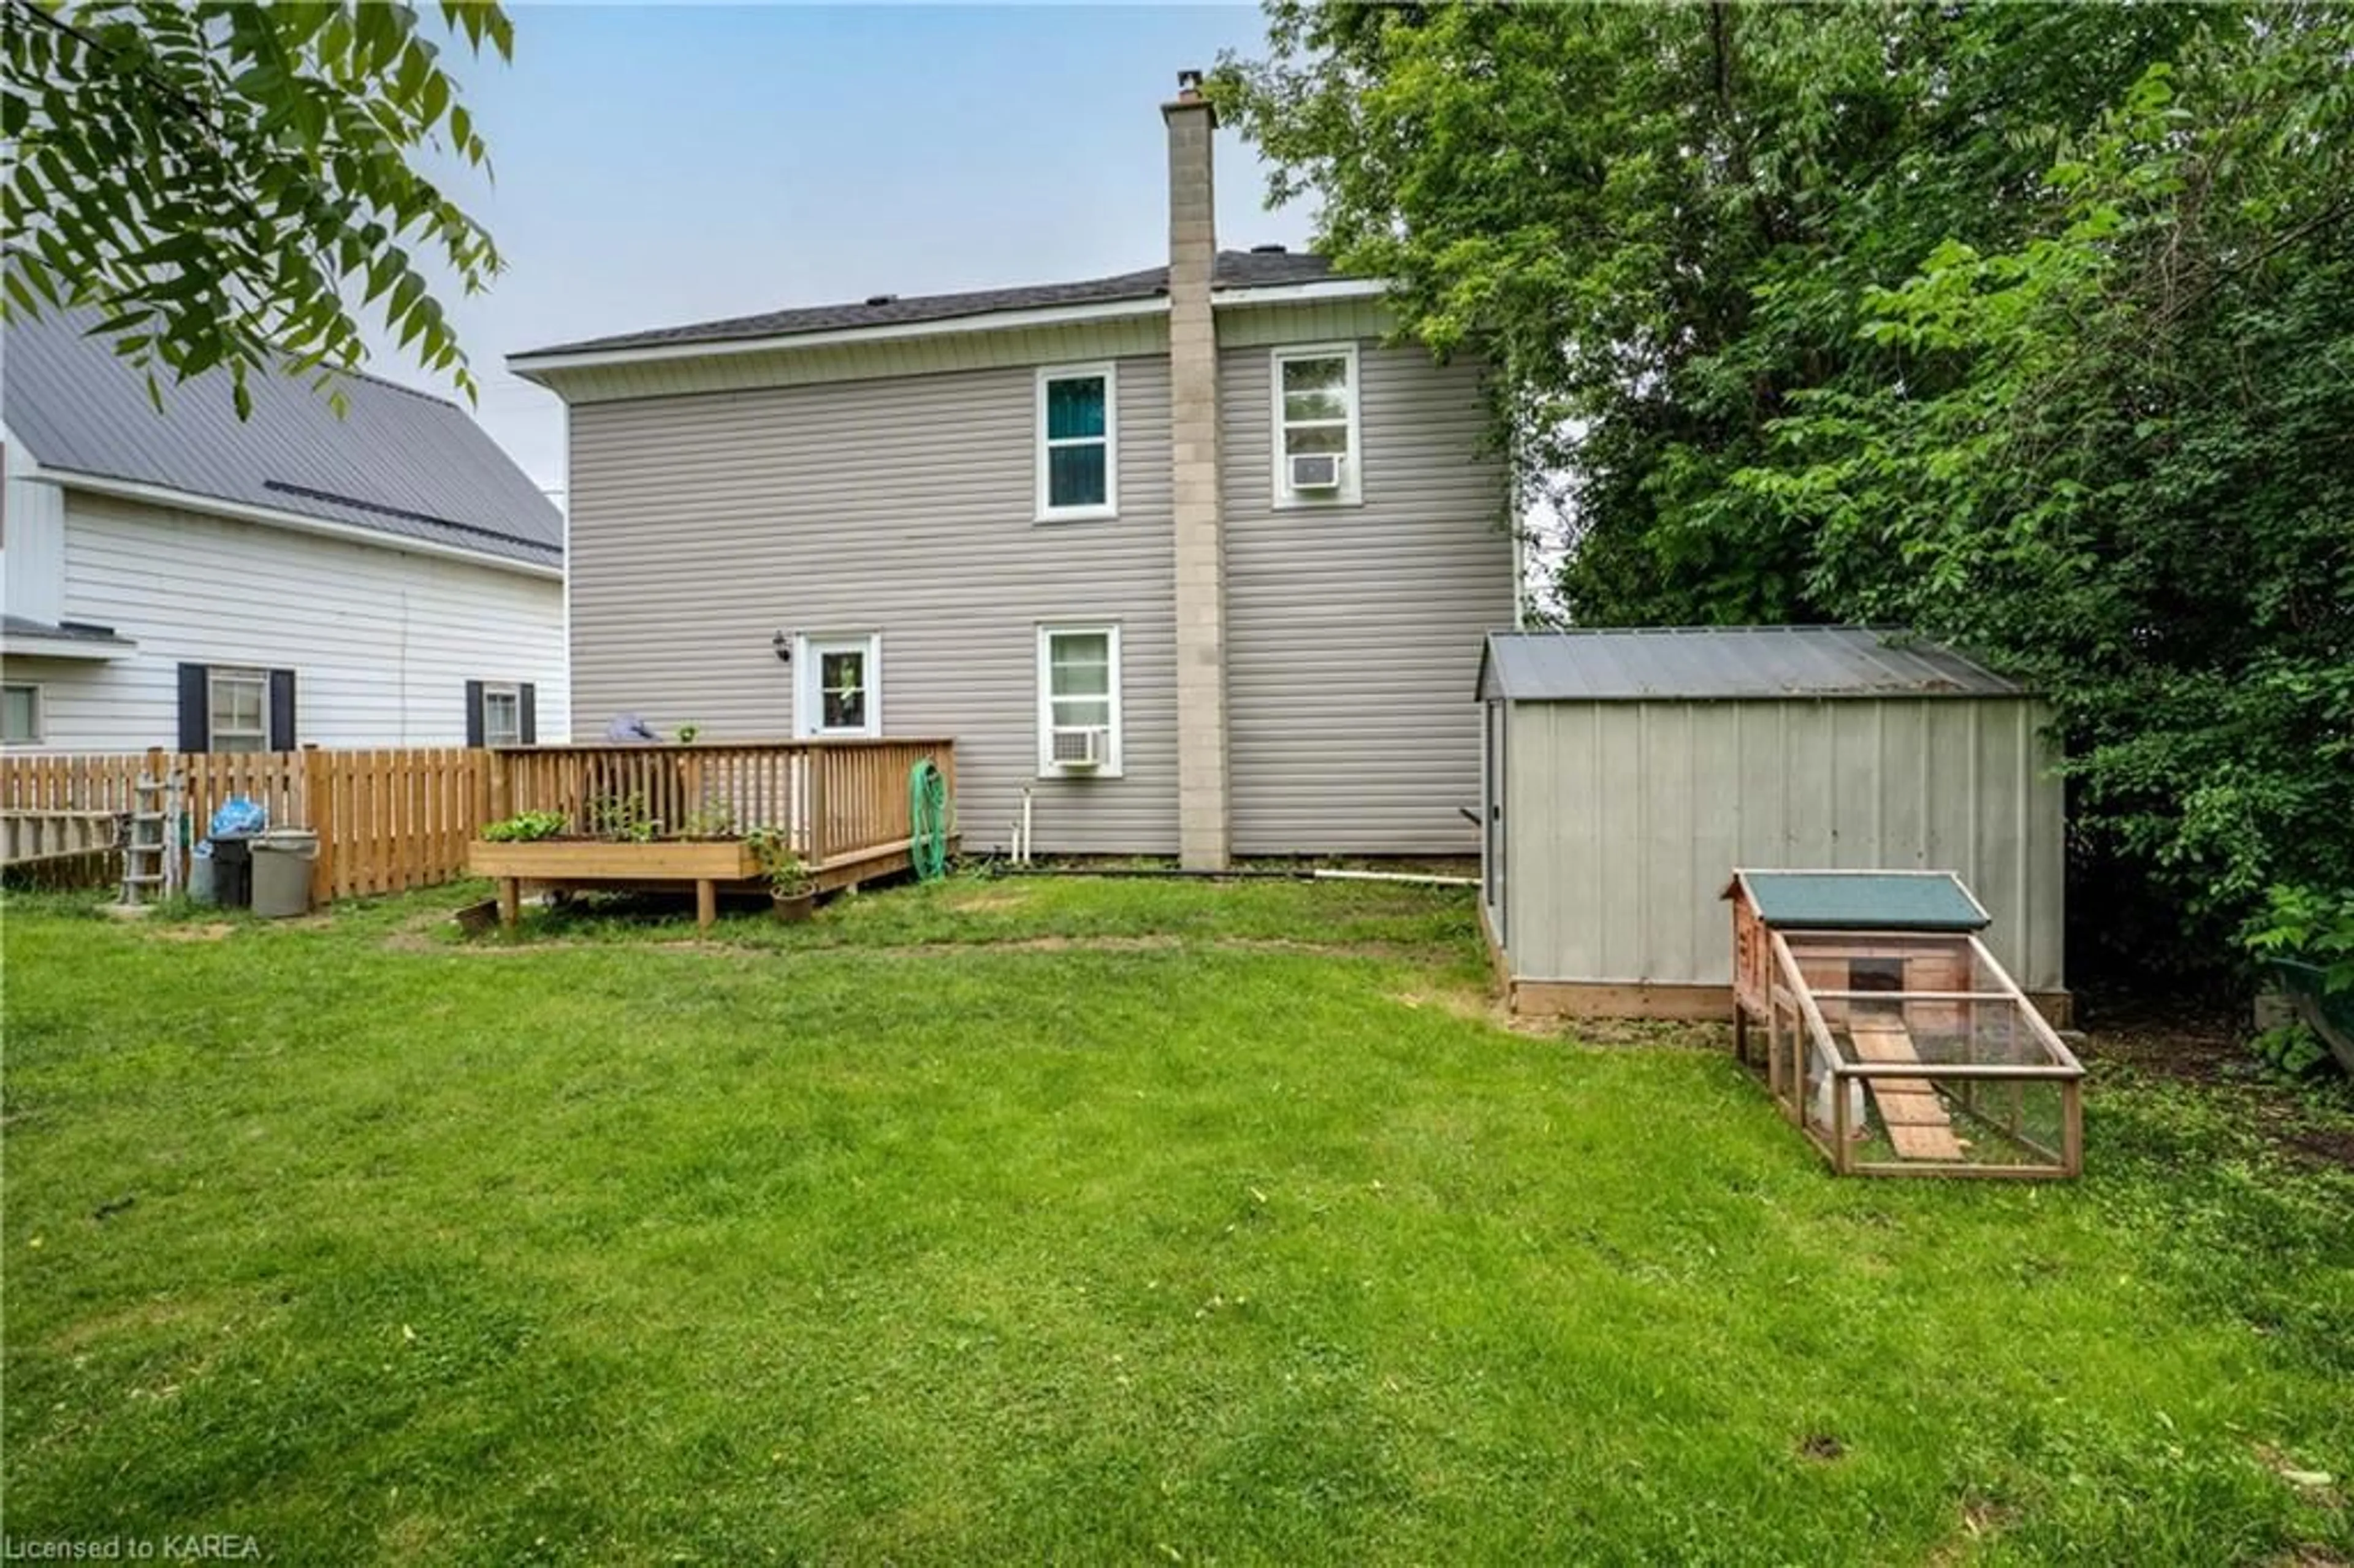 Fenced yard for 60 Concession St, Westport Ontario K0G 1X0